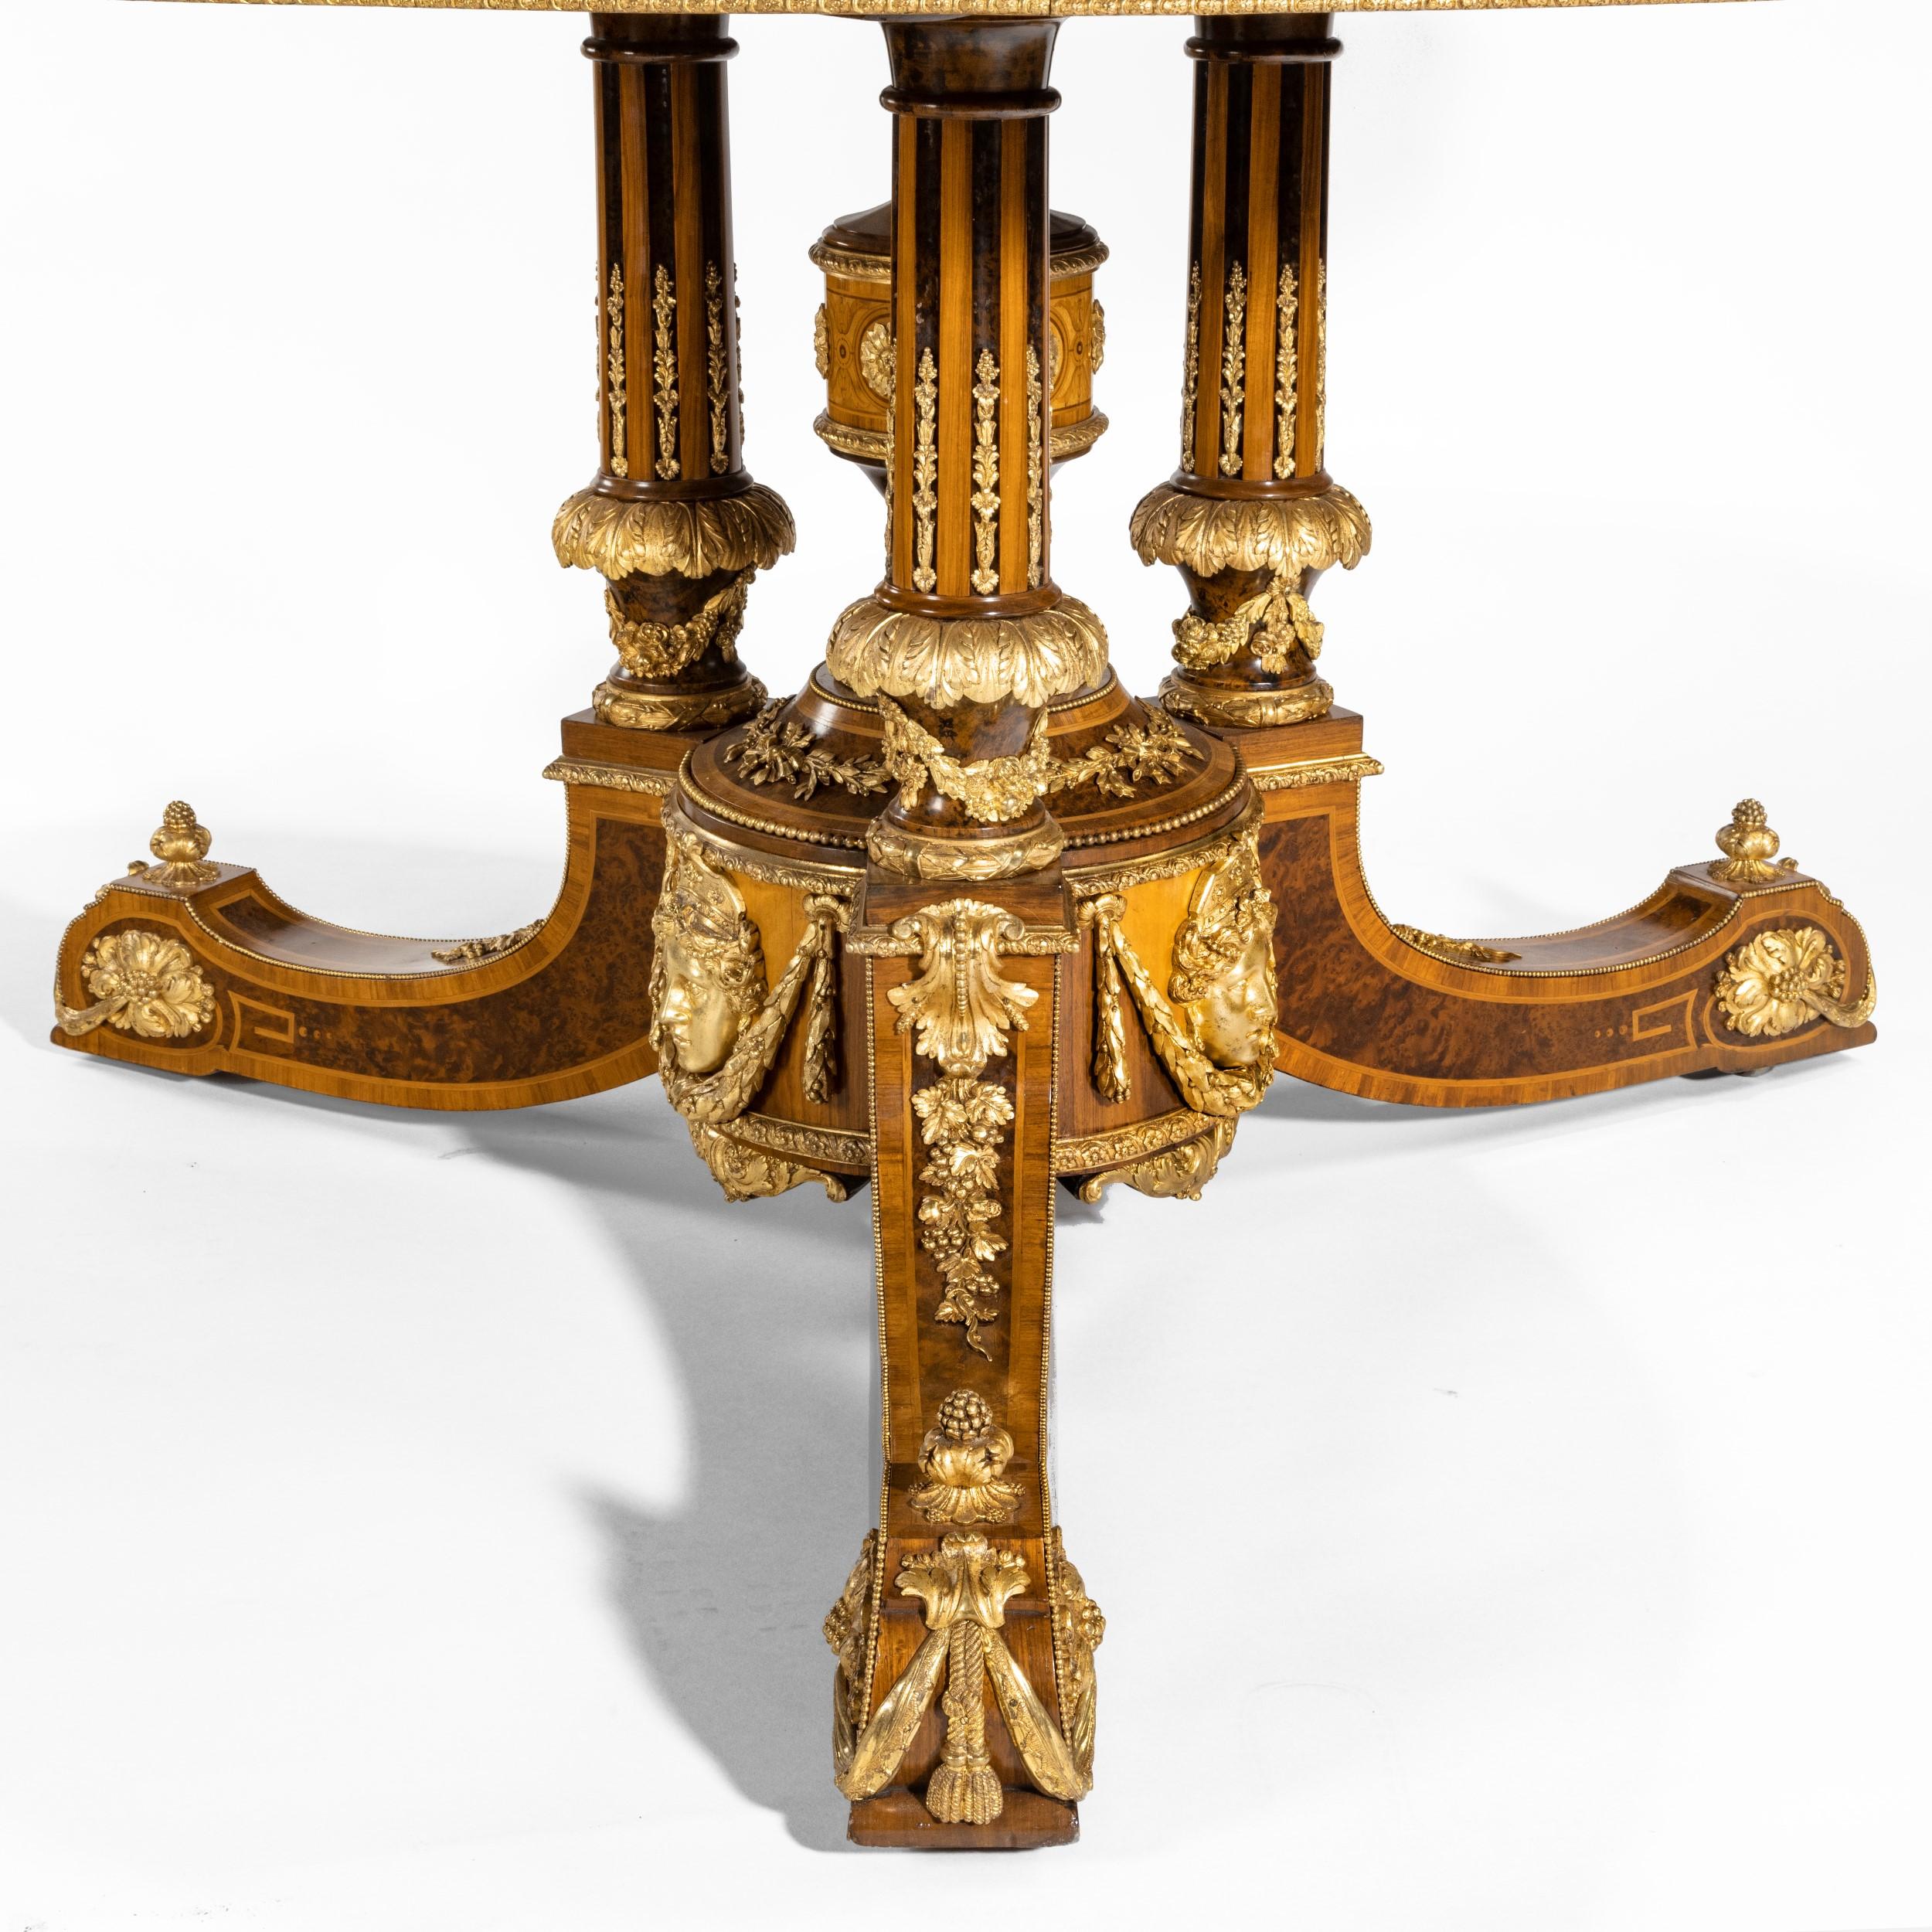 Exceptional 19th Century Centre Table with Thuya Wood Top by Holland & Sons 1